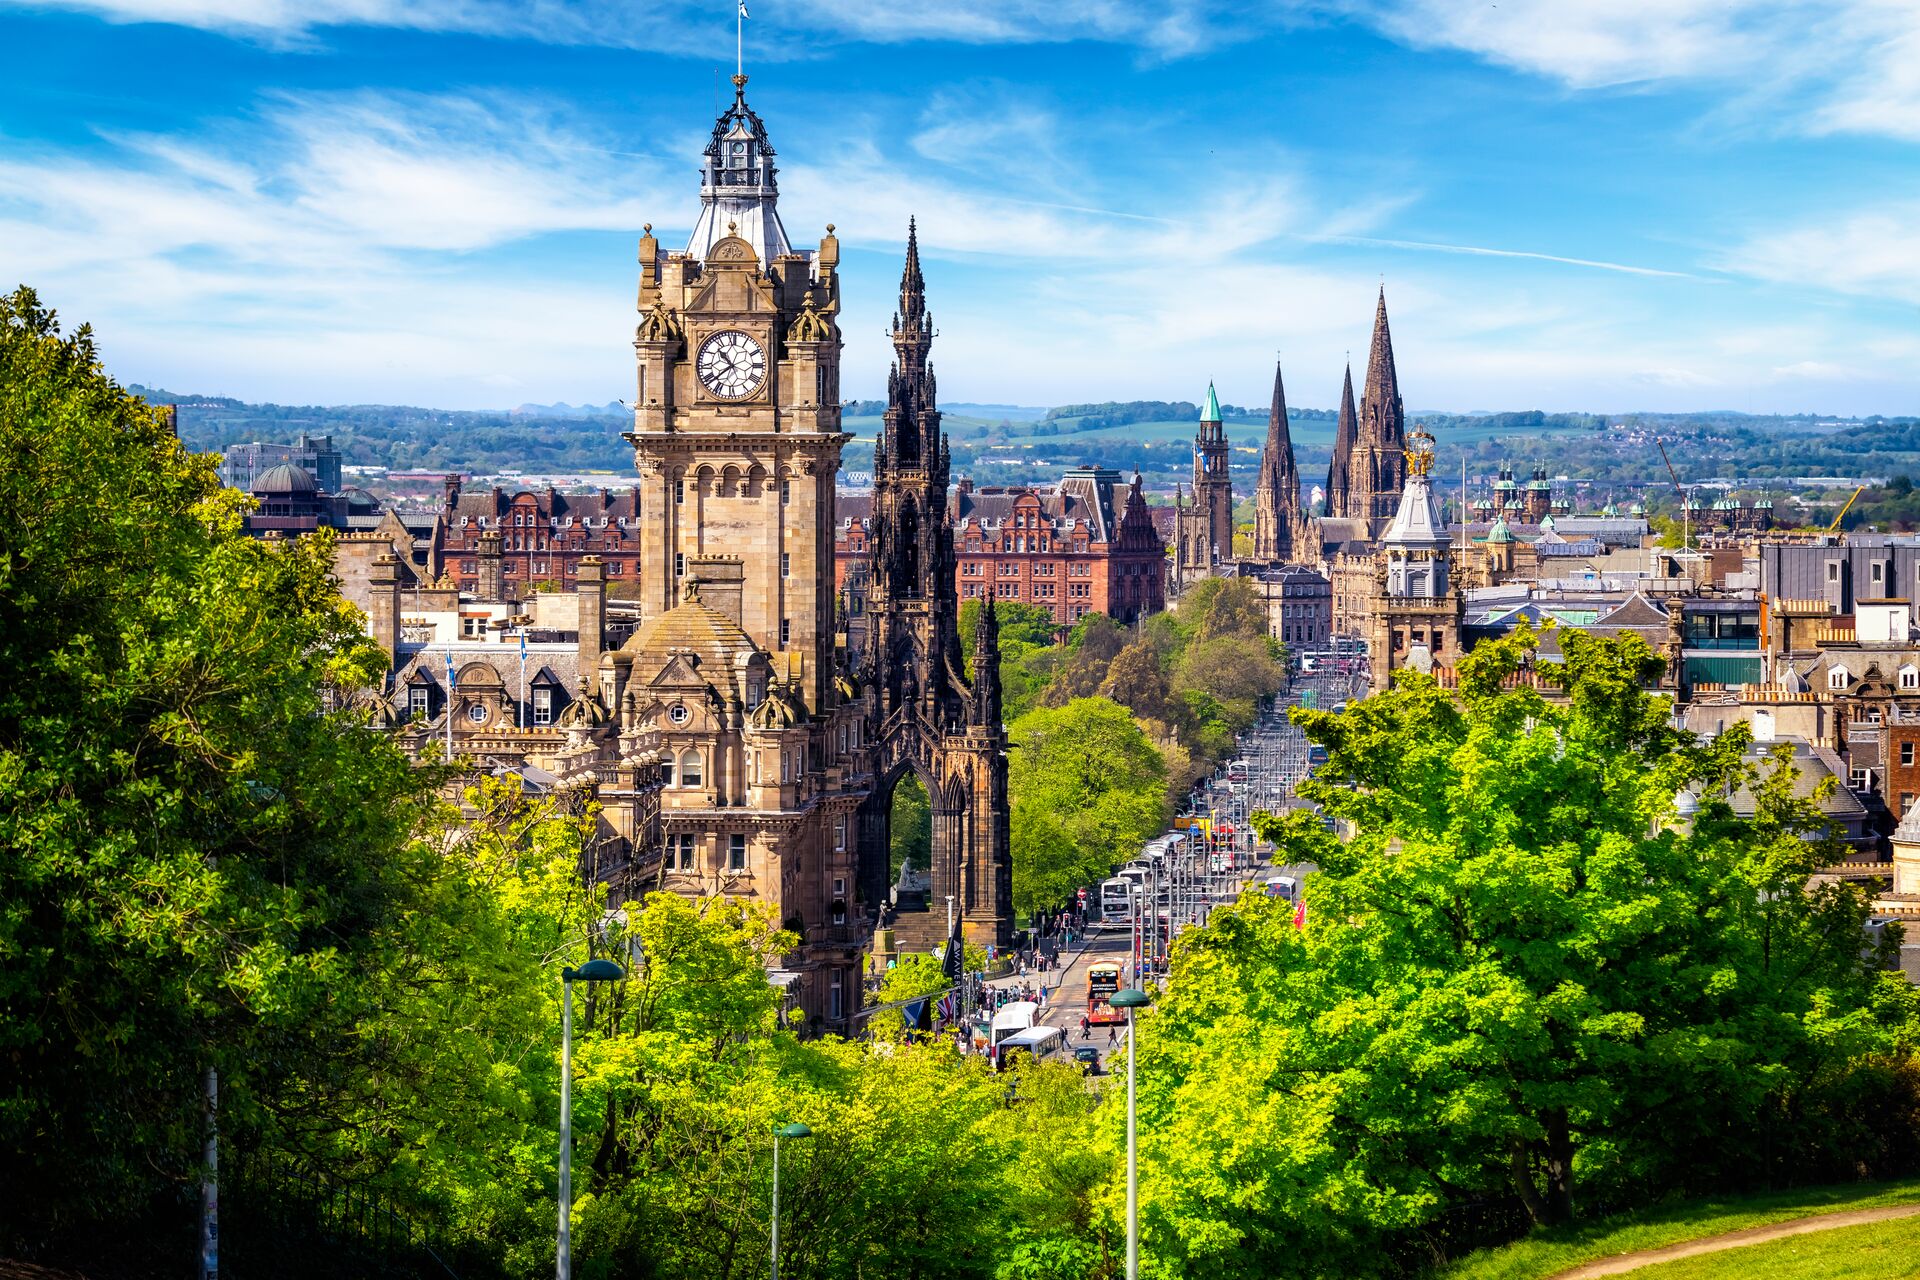 Edinburgh Cathedral is shown from an Ariel shot surrounded by green trees and bustling streets